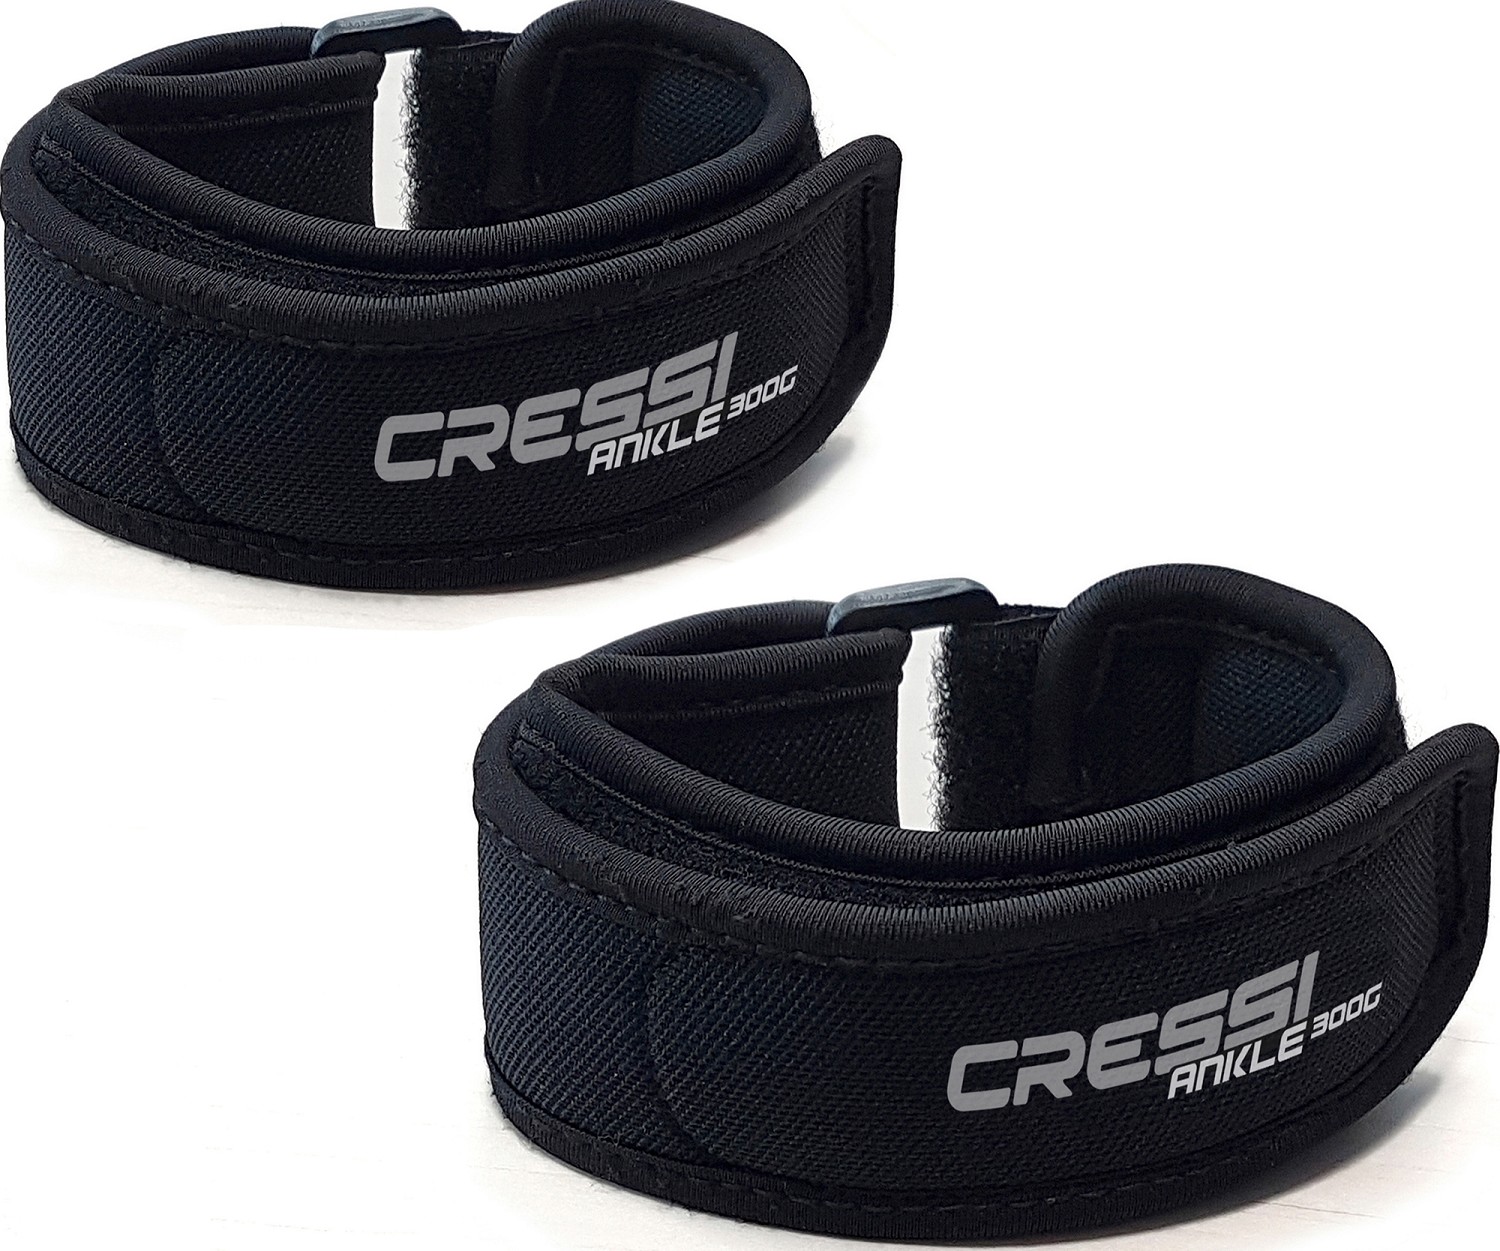 Cressi Ankle weights